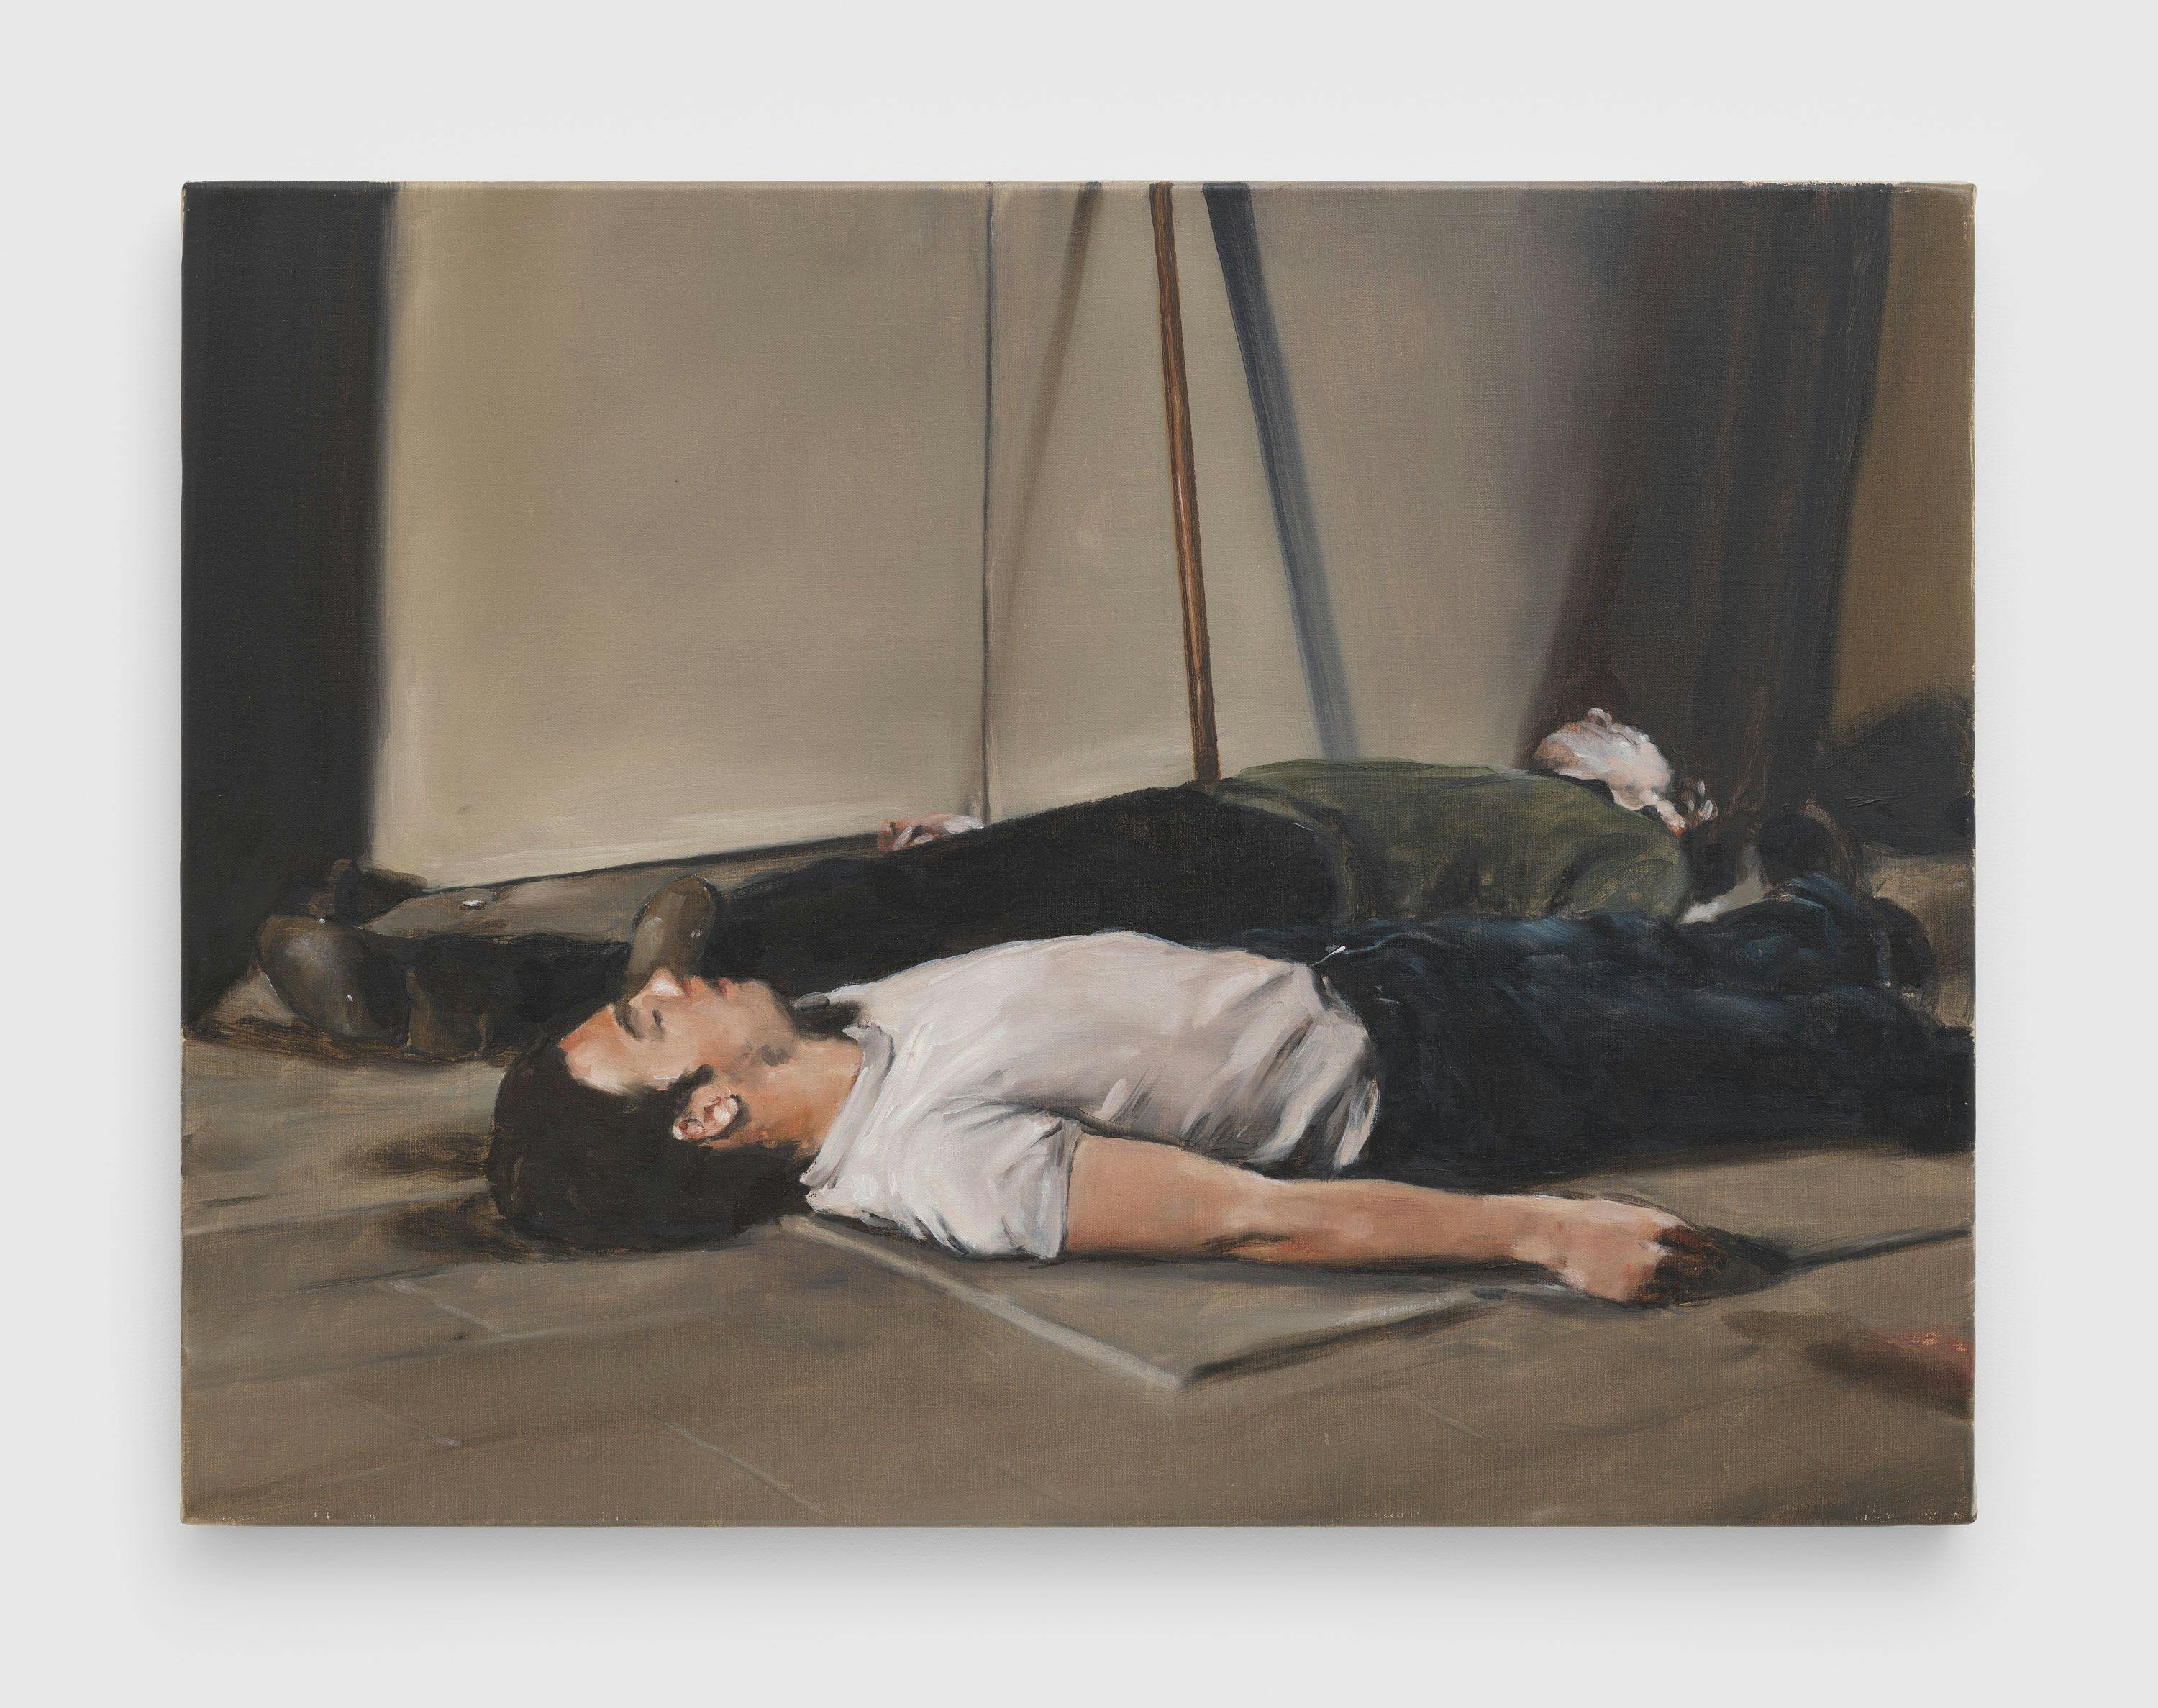 A painting by Michaël Borremans, titled The Bodies (1), dated 2005.